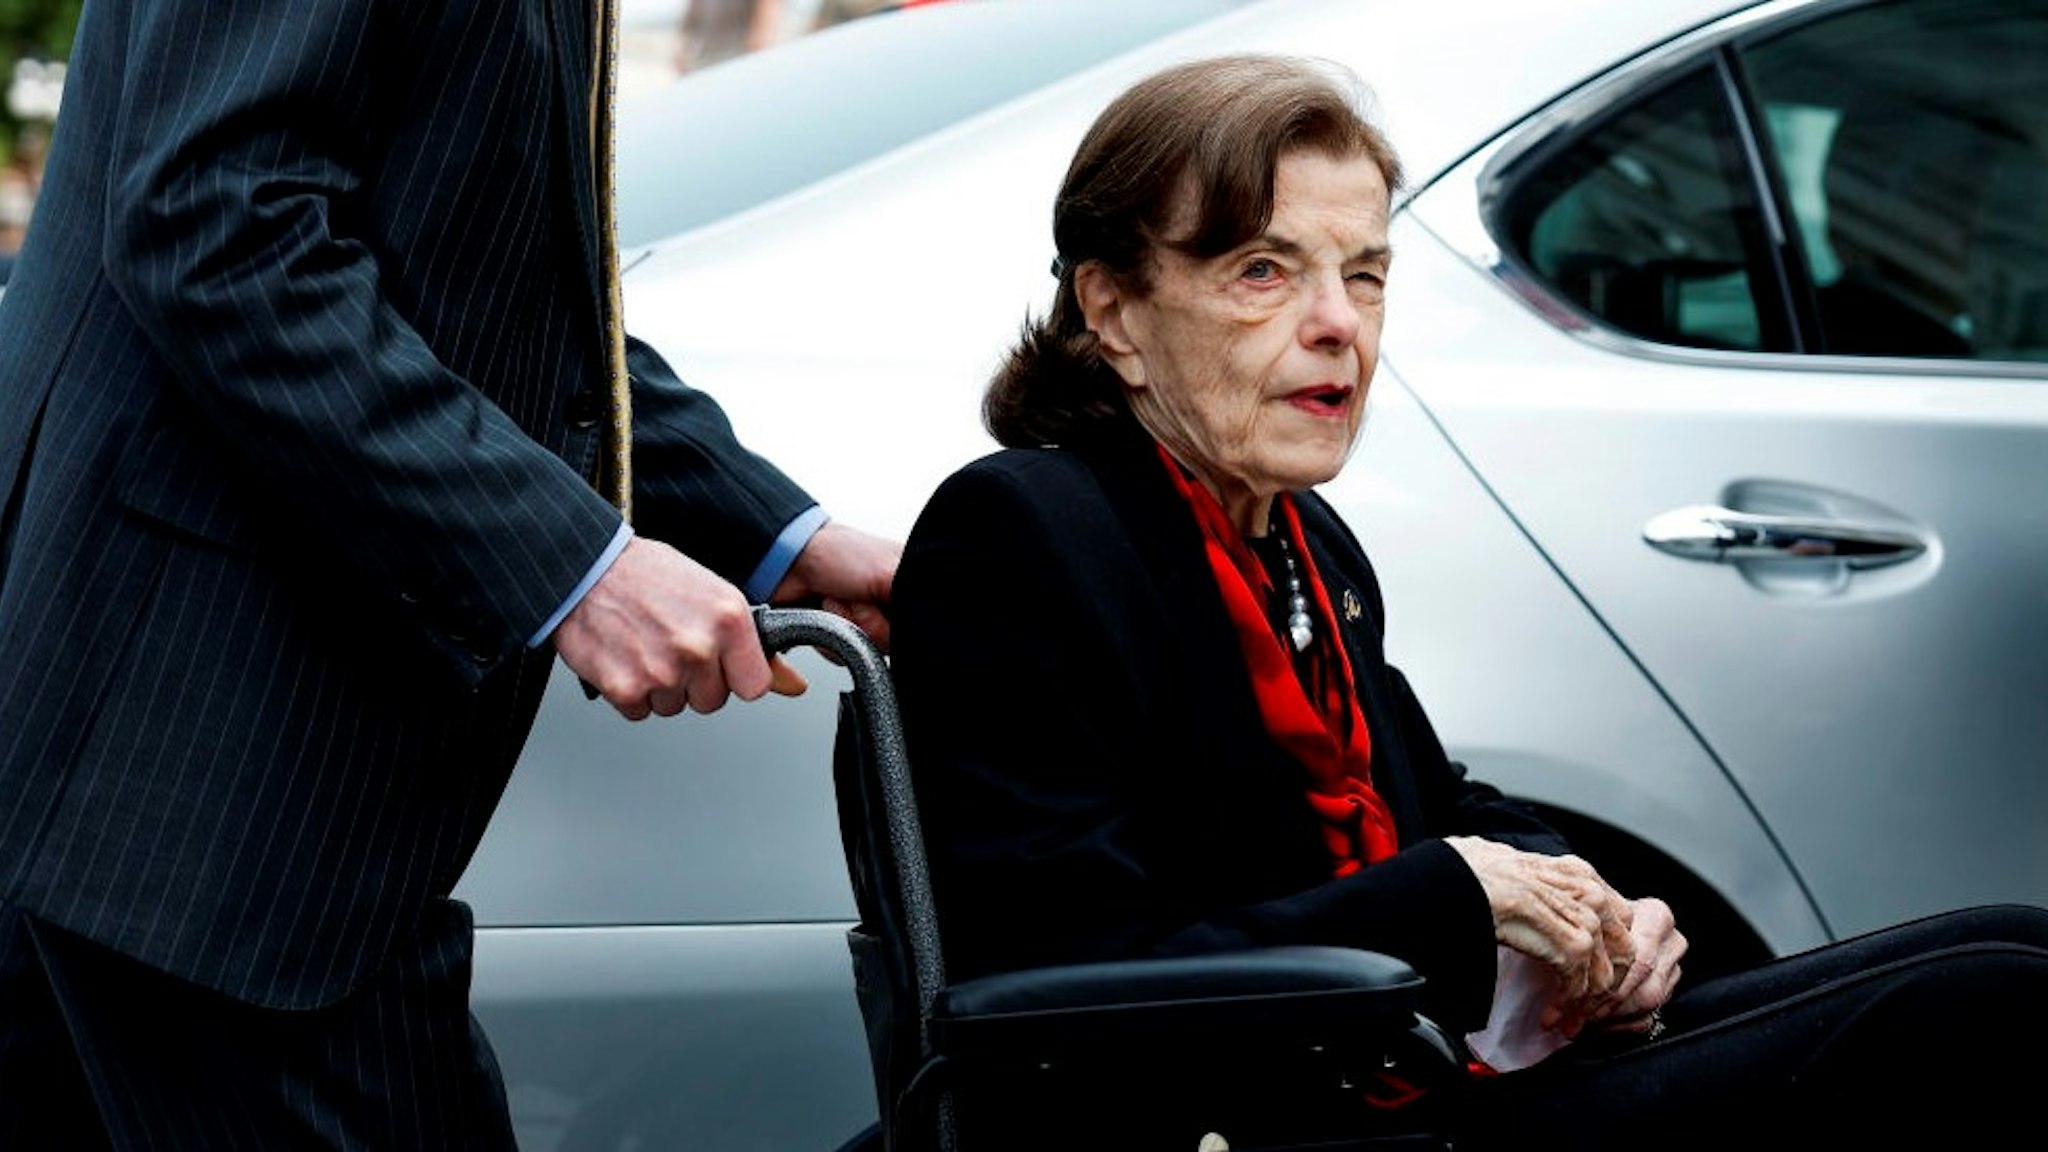 WASHINGTON, DC - MAY 10: Sen. Dianne Feinstein (D-CA) arrives to the U.S. Capitol Building on May 10, 2023 in Washington, DC. Feinstein is returning to Washington after over two months away following a hospitalization due to shingles. (Photo by